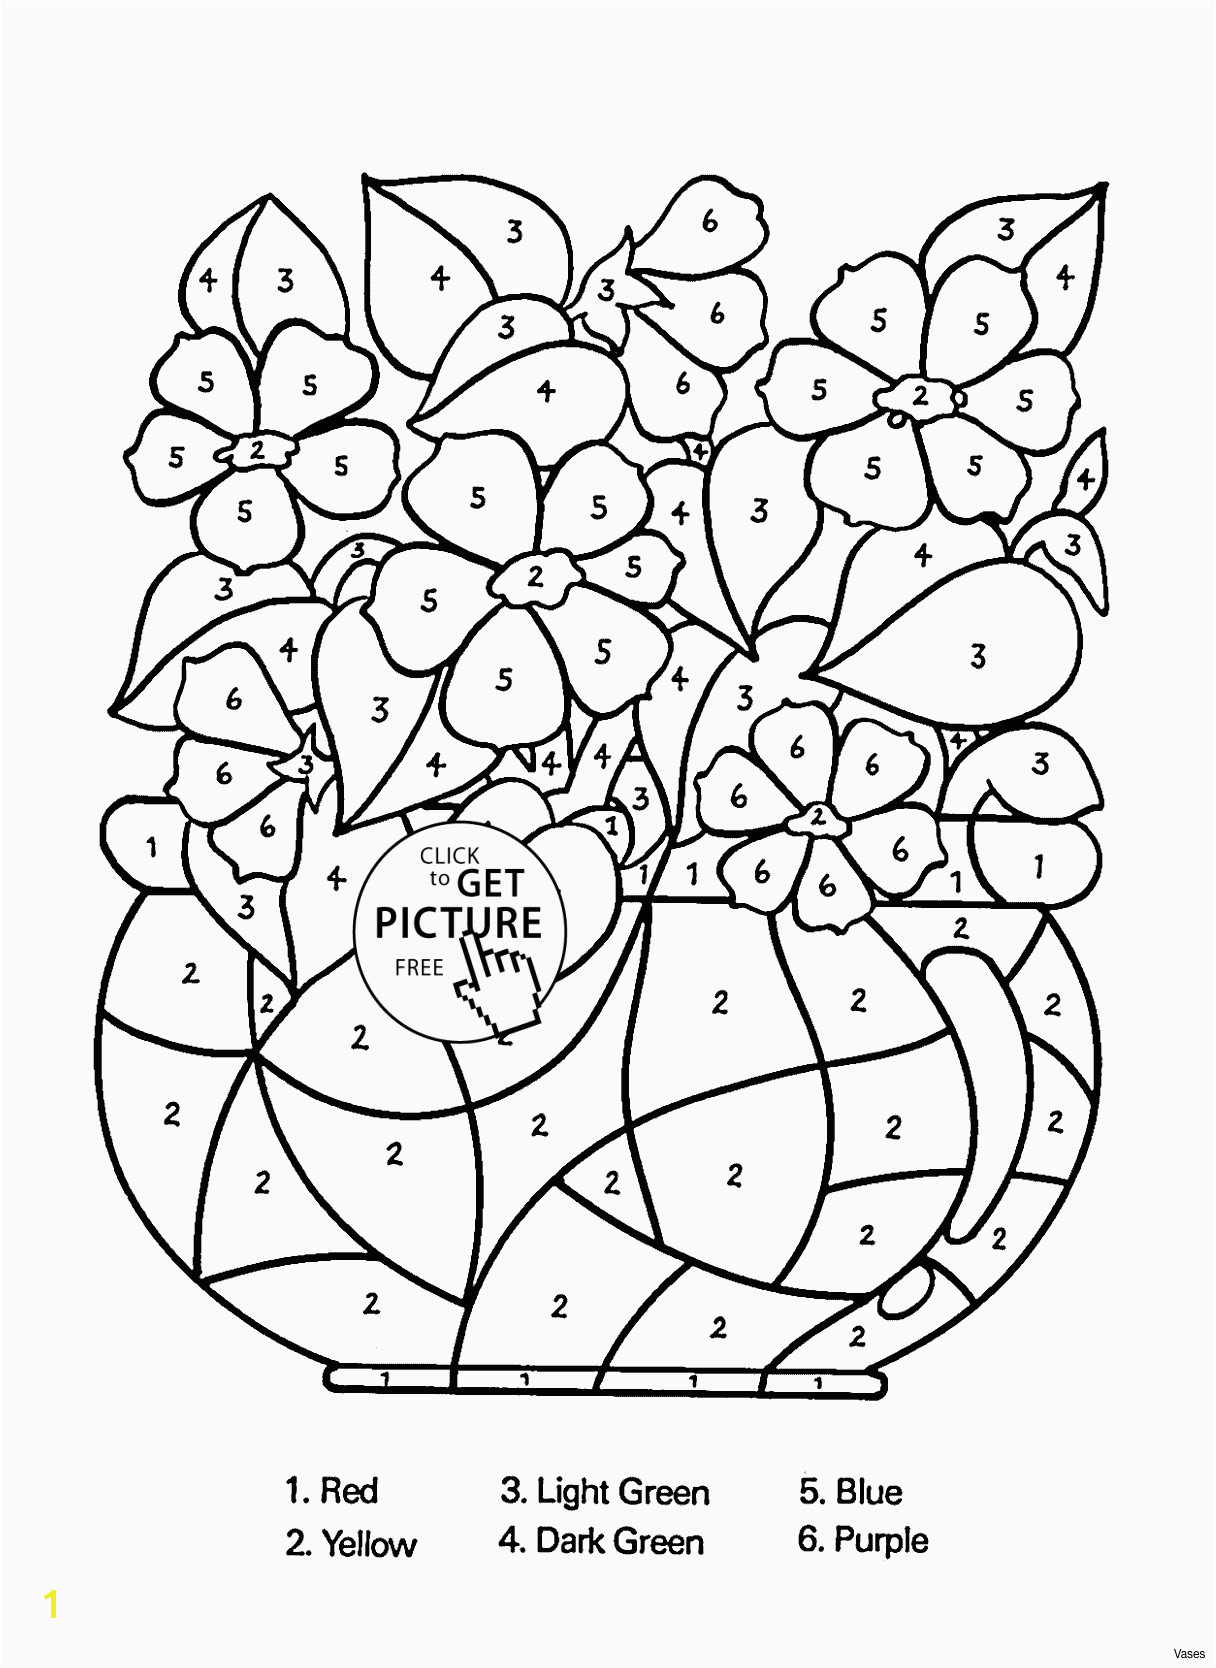 Animal Alphabet Letters Inspirational Vases Flower Vase Coloring Page Pages Flowers In A top I 0d